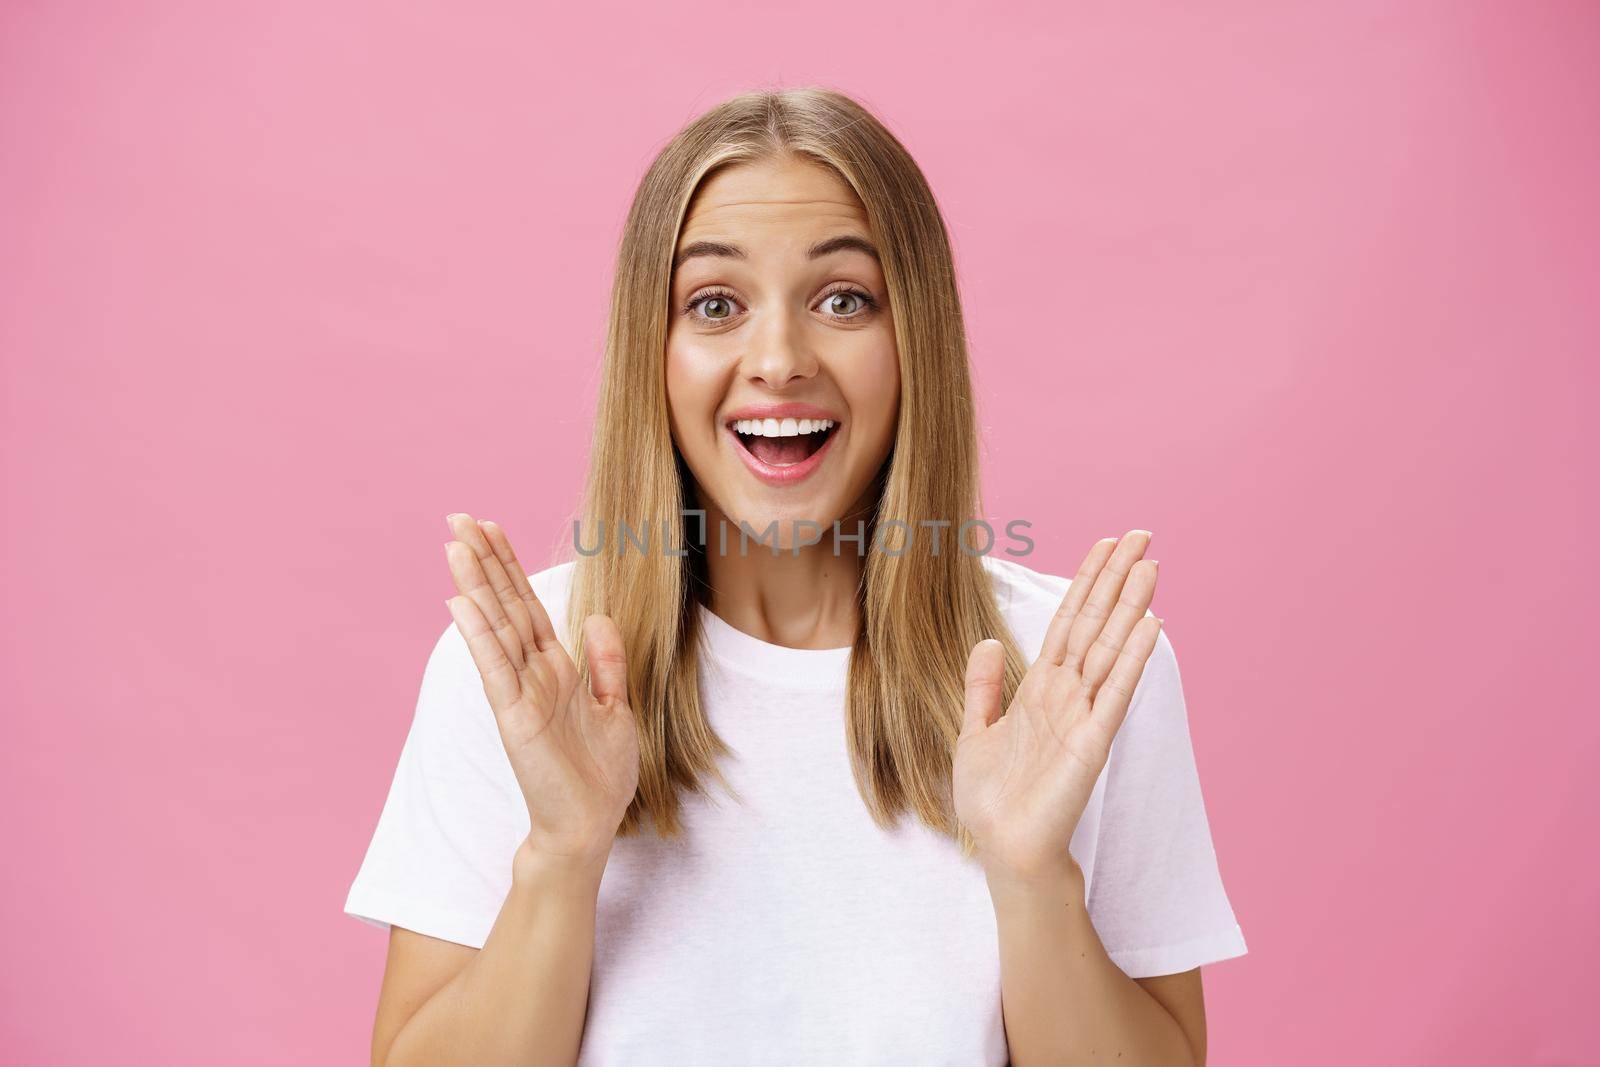 Woman learning awesome great news clasping hands in joy and excitement rejoicing feeling hapyp for friend smiling broadly and looking cheerful at camera with amused expression over pink background. Body language and emotions concept